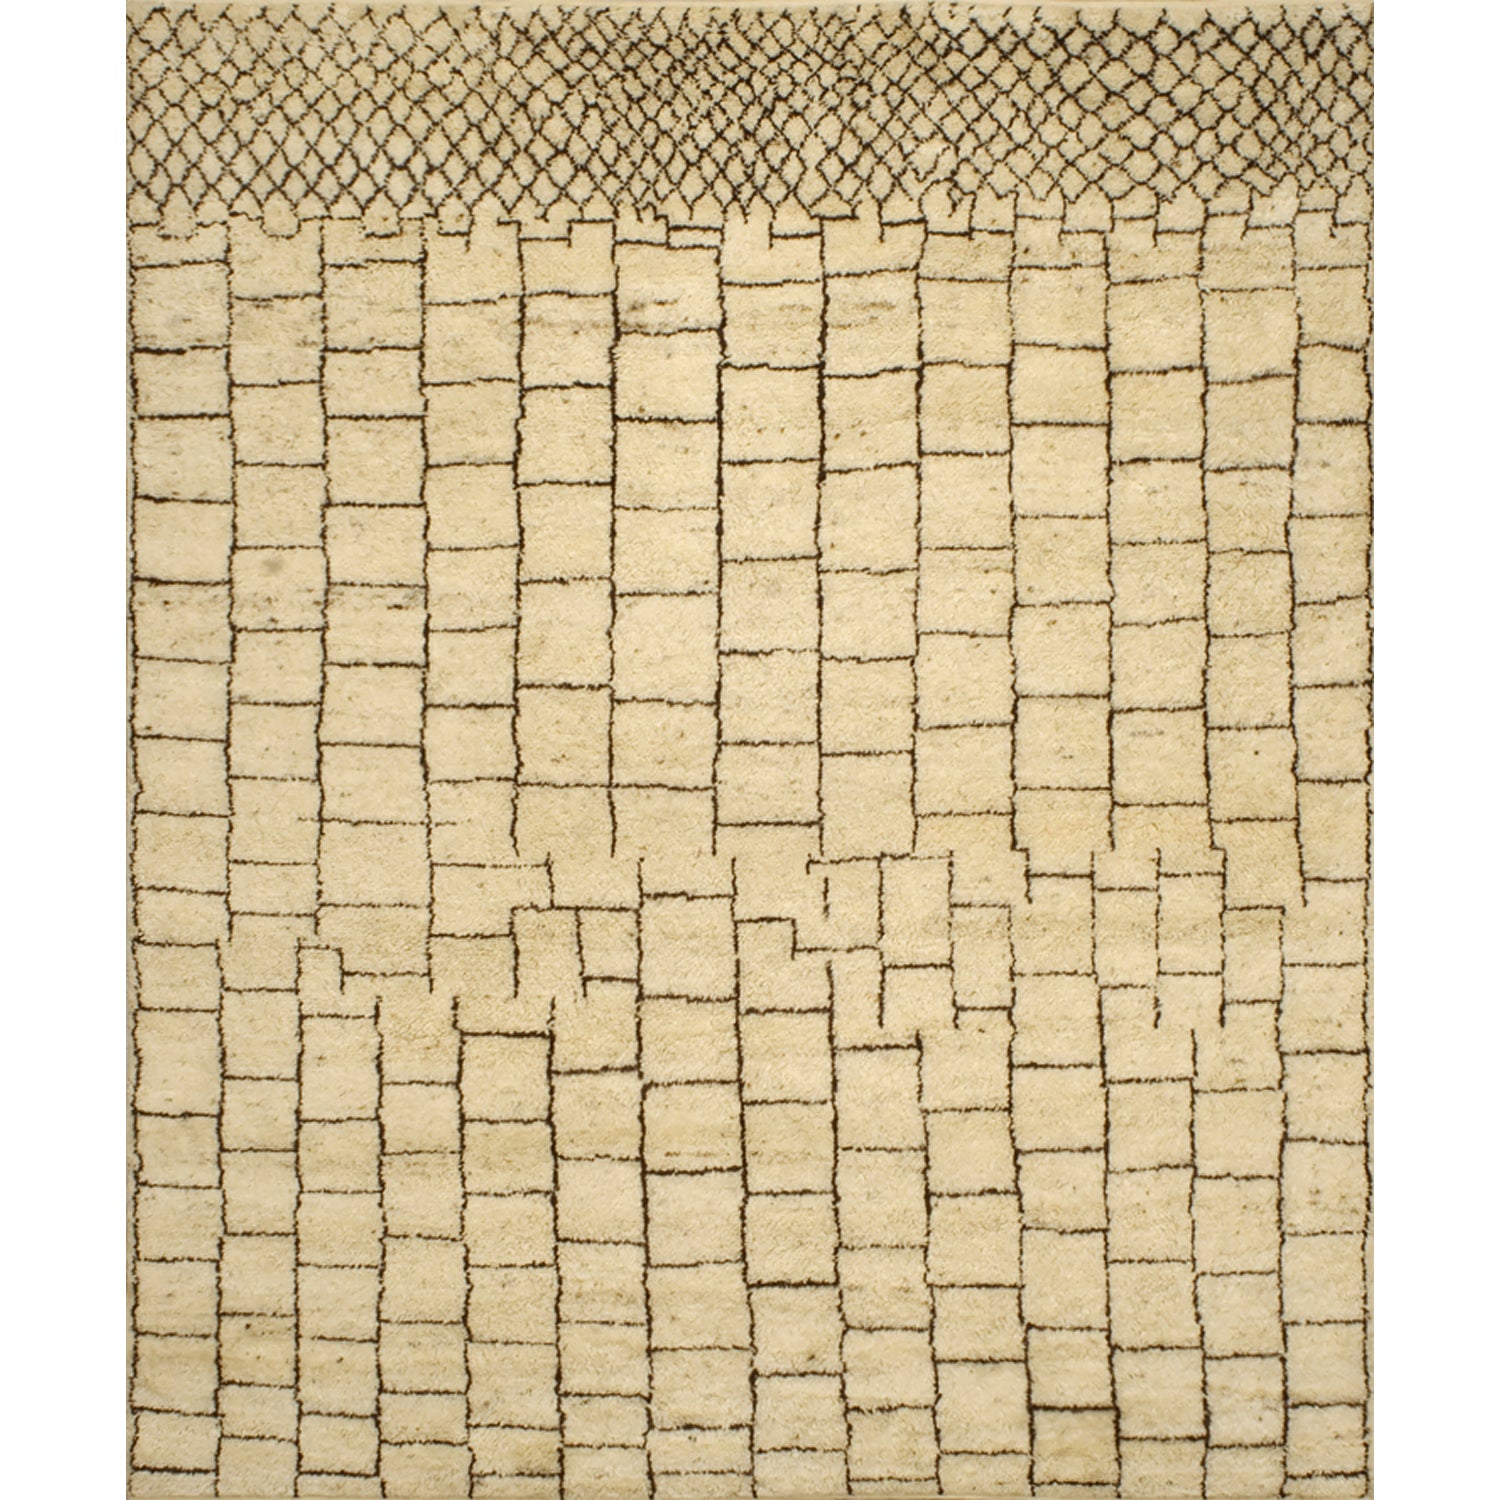 Rectangular woven high-pile rug in an ombre pattern of repeating squares that turn into dense diamonds in black on a tan field.